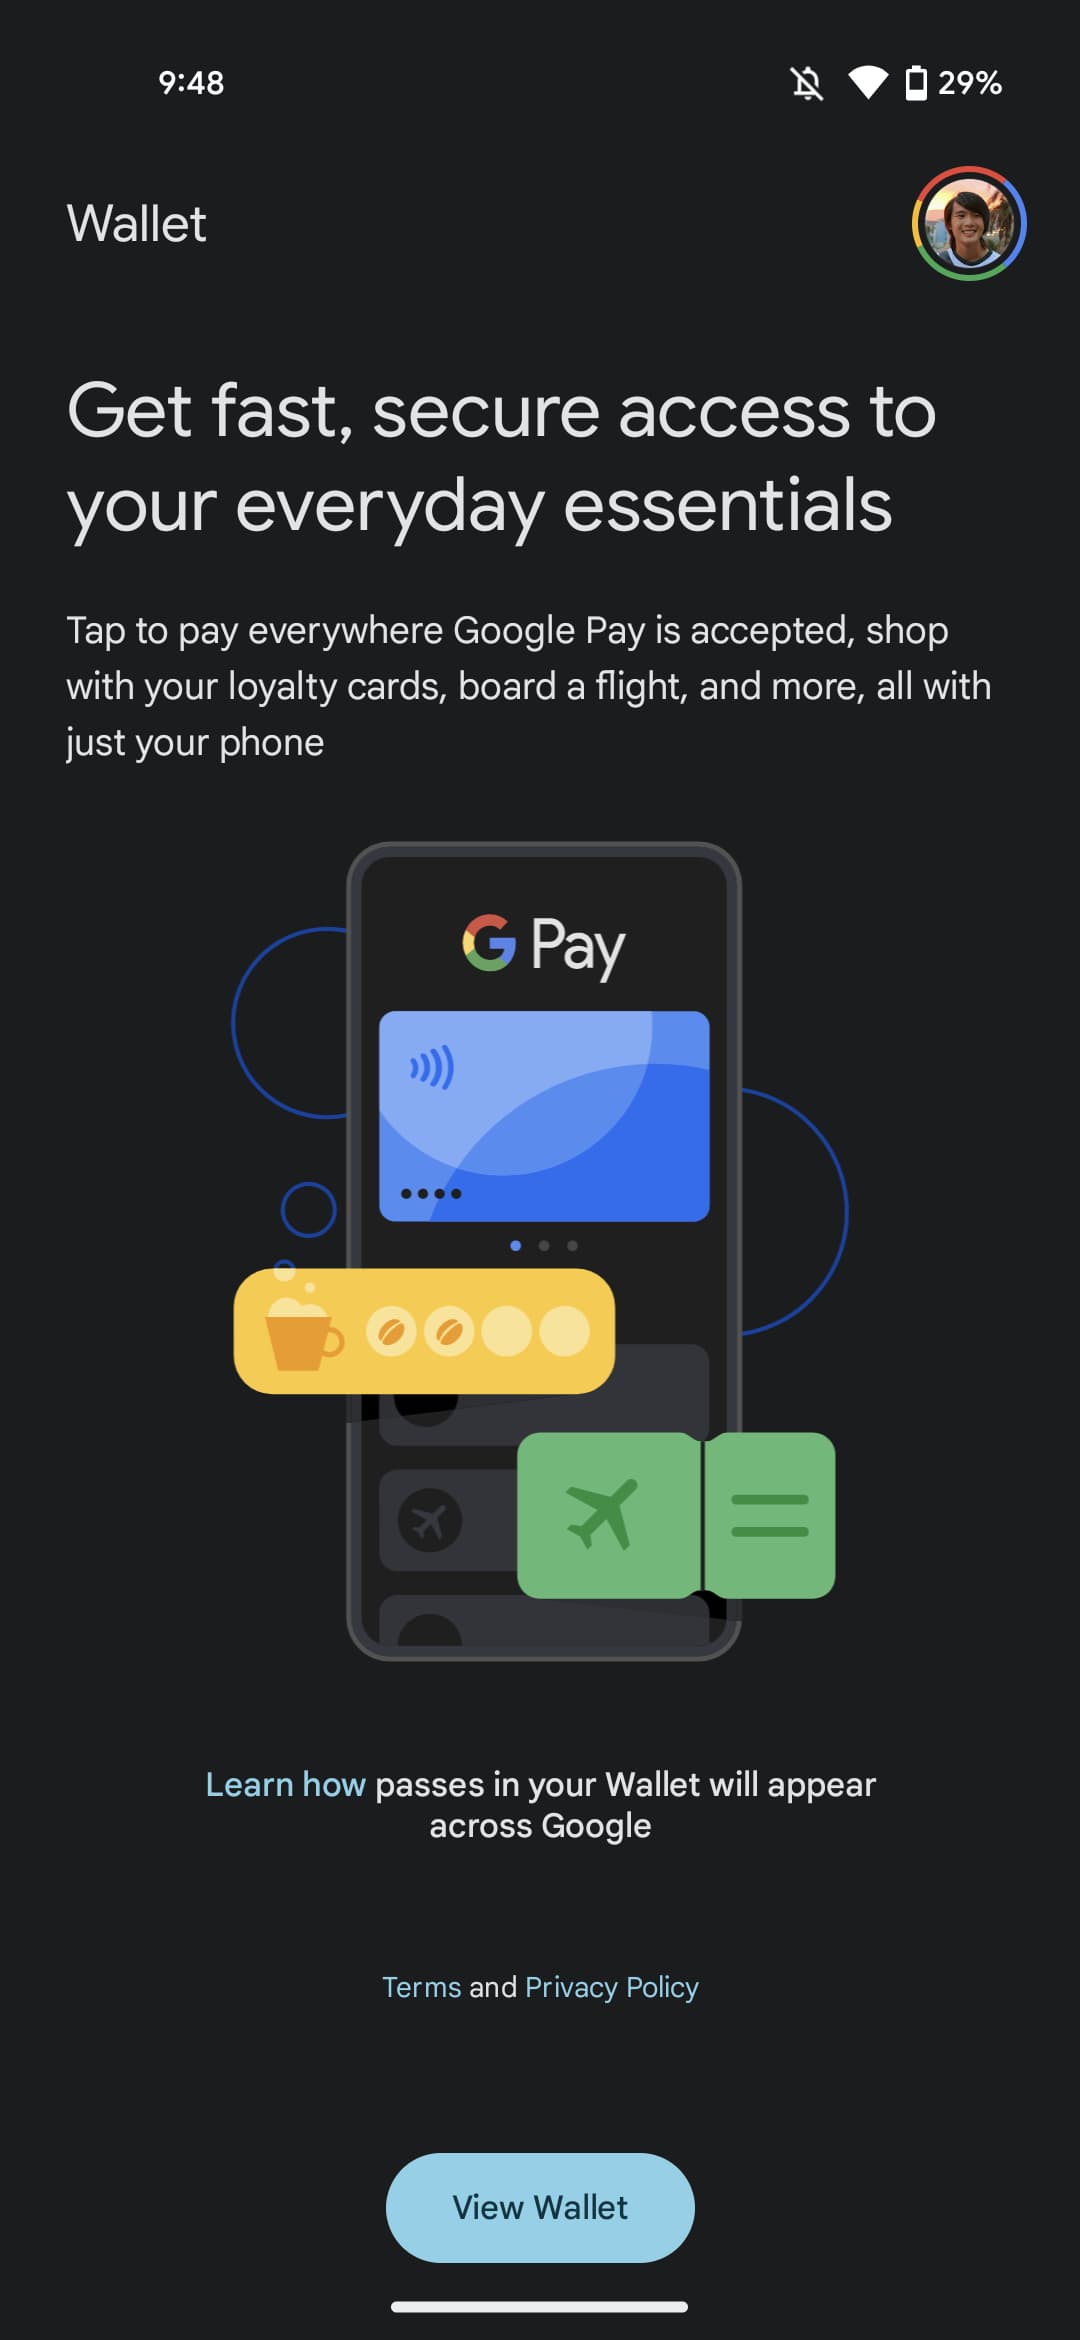 Google Wallet rolling out